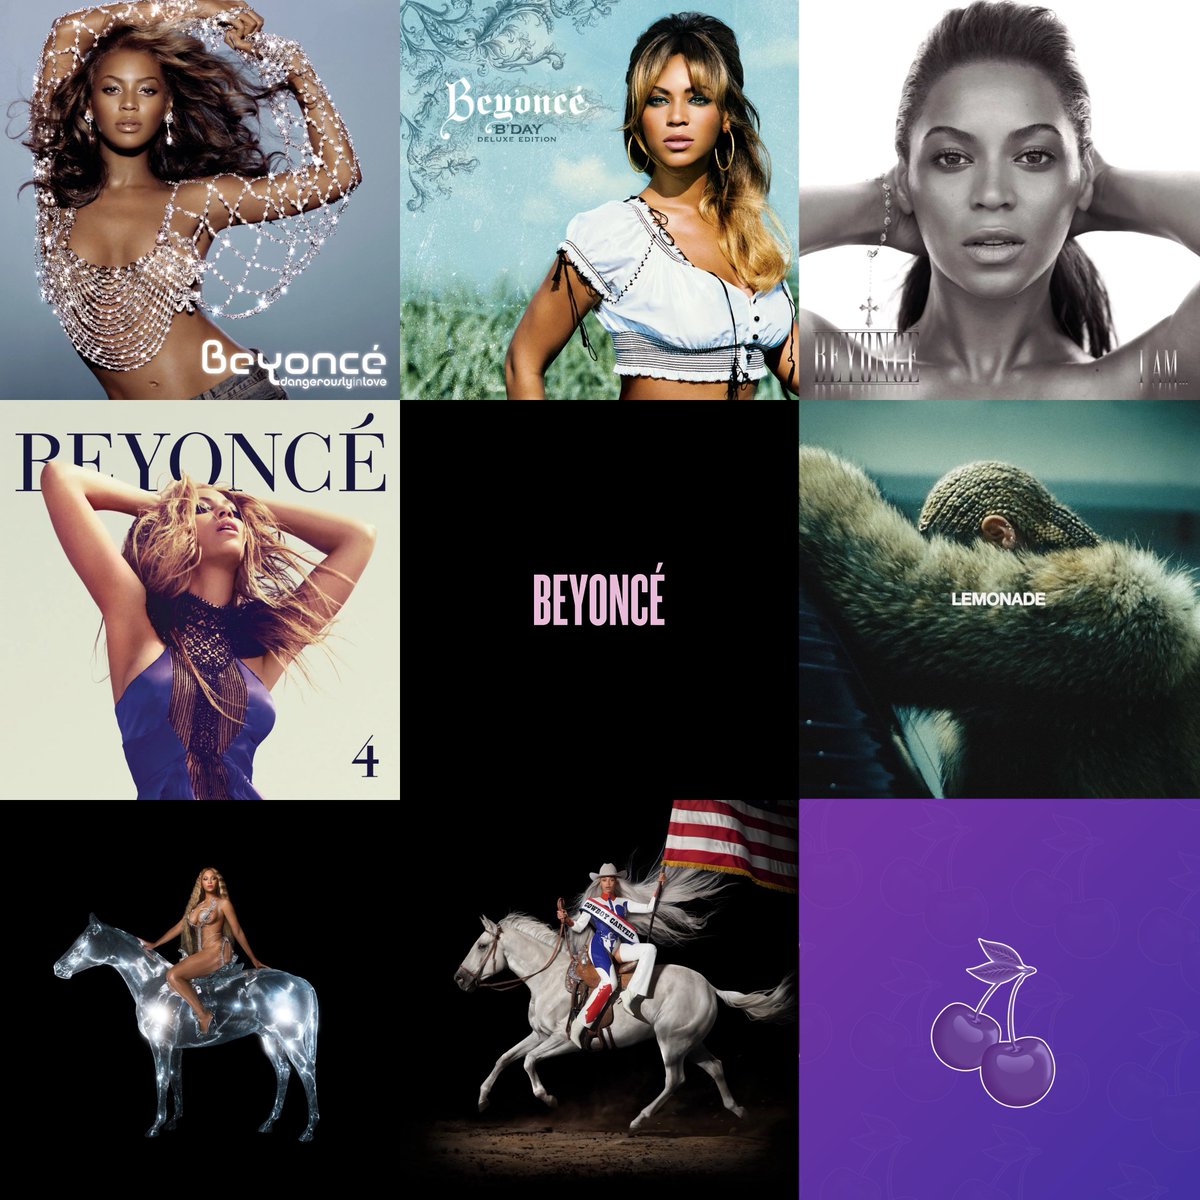 Beyoncé is the first woman in history to debut each of her first eight studio albums at #1 on the Billboard 200.